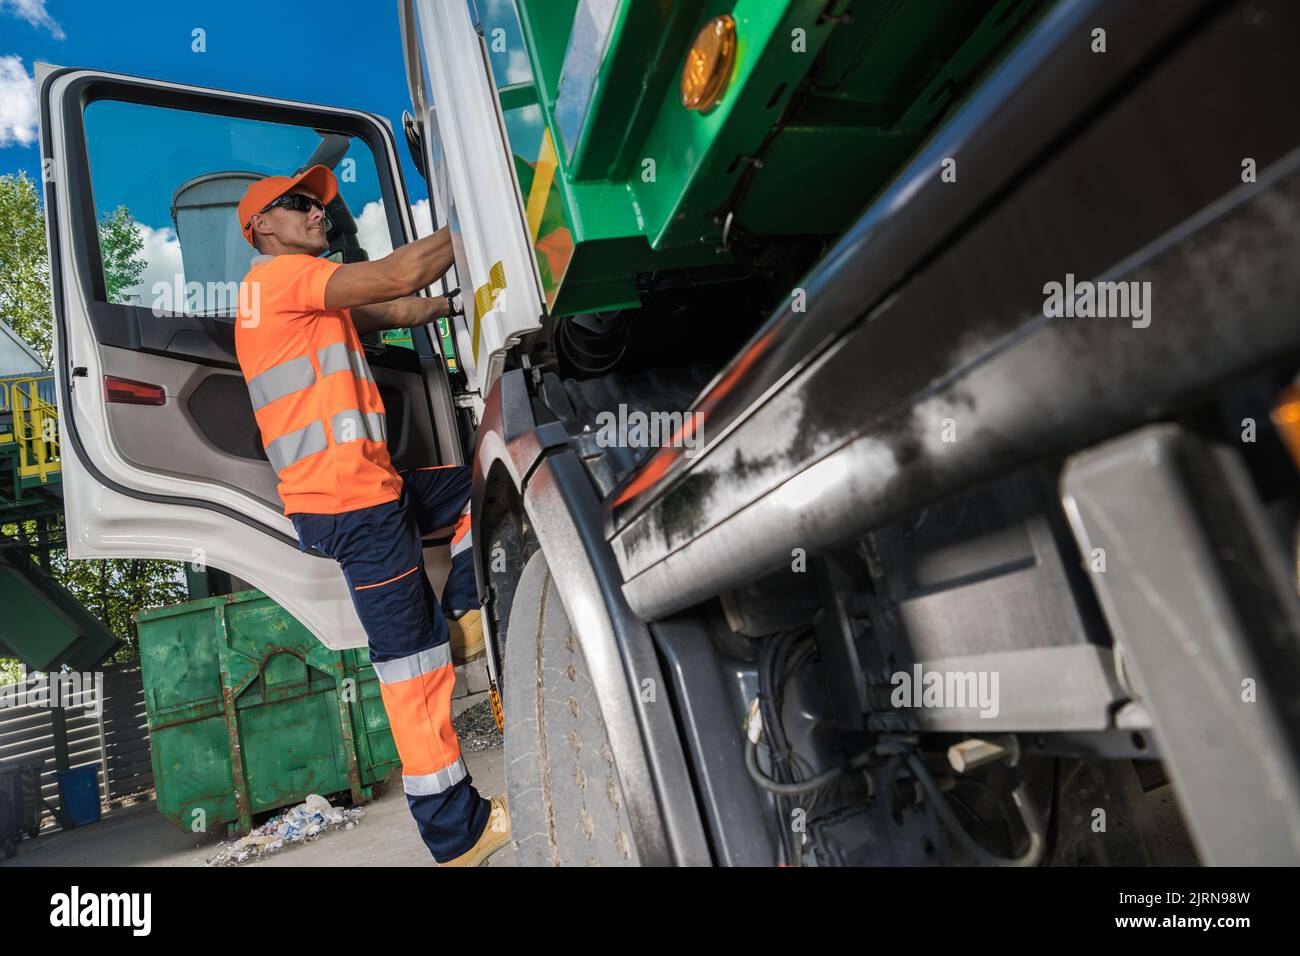 Waste Management Theme. Caucasian Garbage Truck Driver in His 40s Collecting City Garbage and Delivering to a Sorting Facility Stock Photo